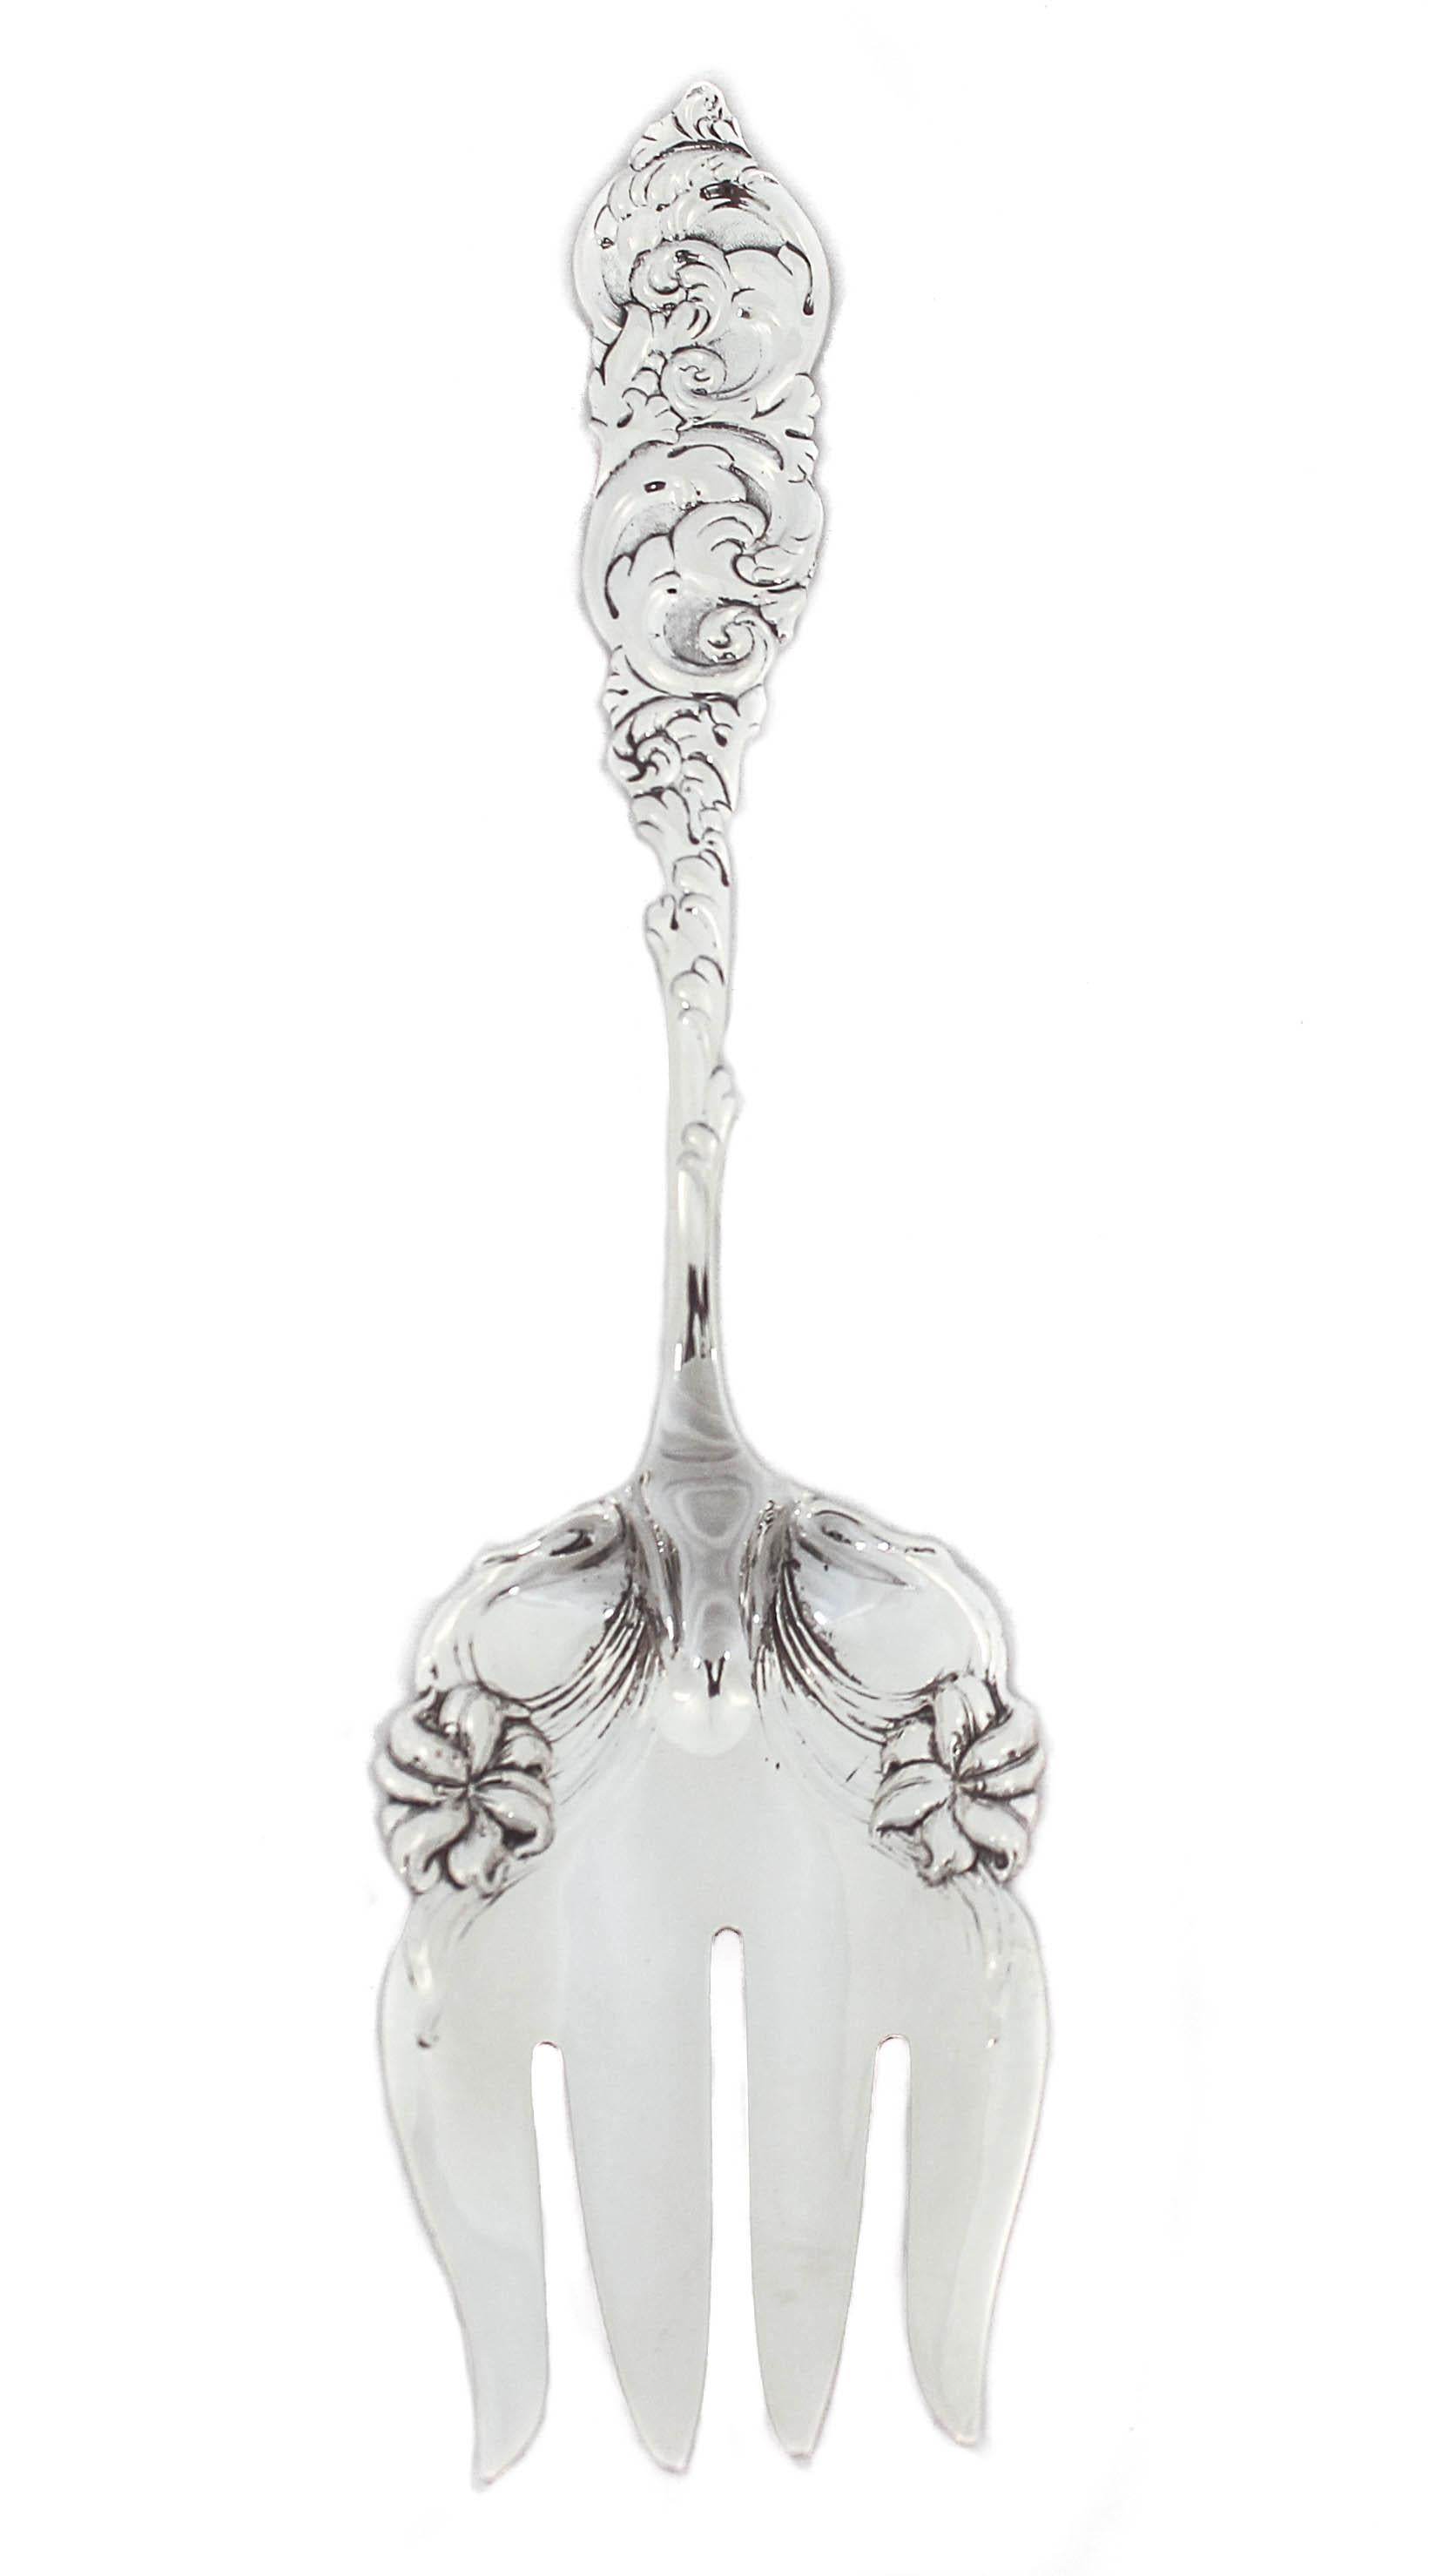 Being offered is a sterling silver fork and spoon set by Amston Silver. The pattern is “Gladstone” and it was first introduced in 1891. Notice the wide and elaborate detail in the handles, and the flowers on the sides of the bowl. Great serving